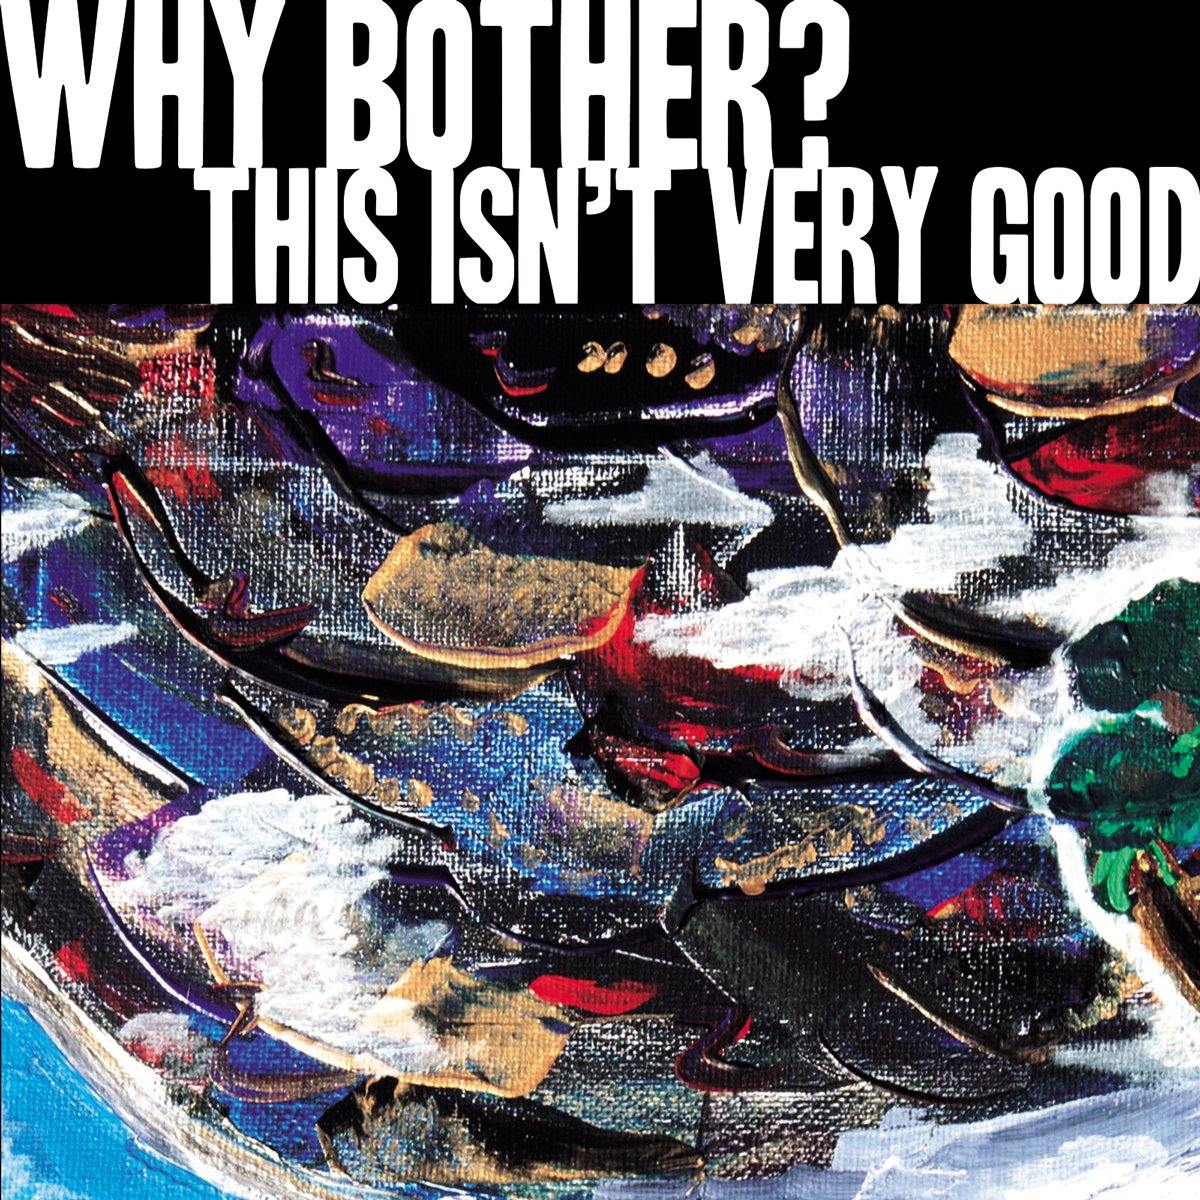 Buy – Why Bother? "This Isn't Very Good" Digital Download – Band & Music Merch – Cold Cuts Merch